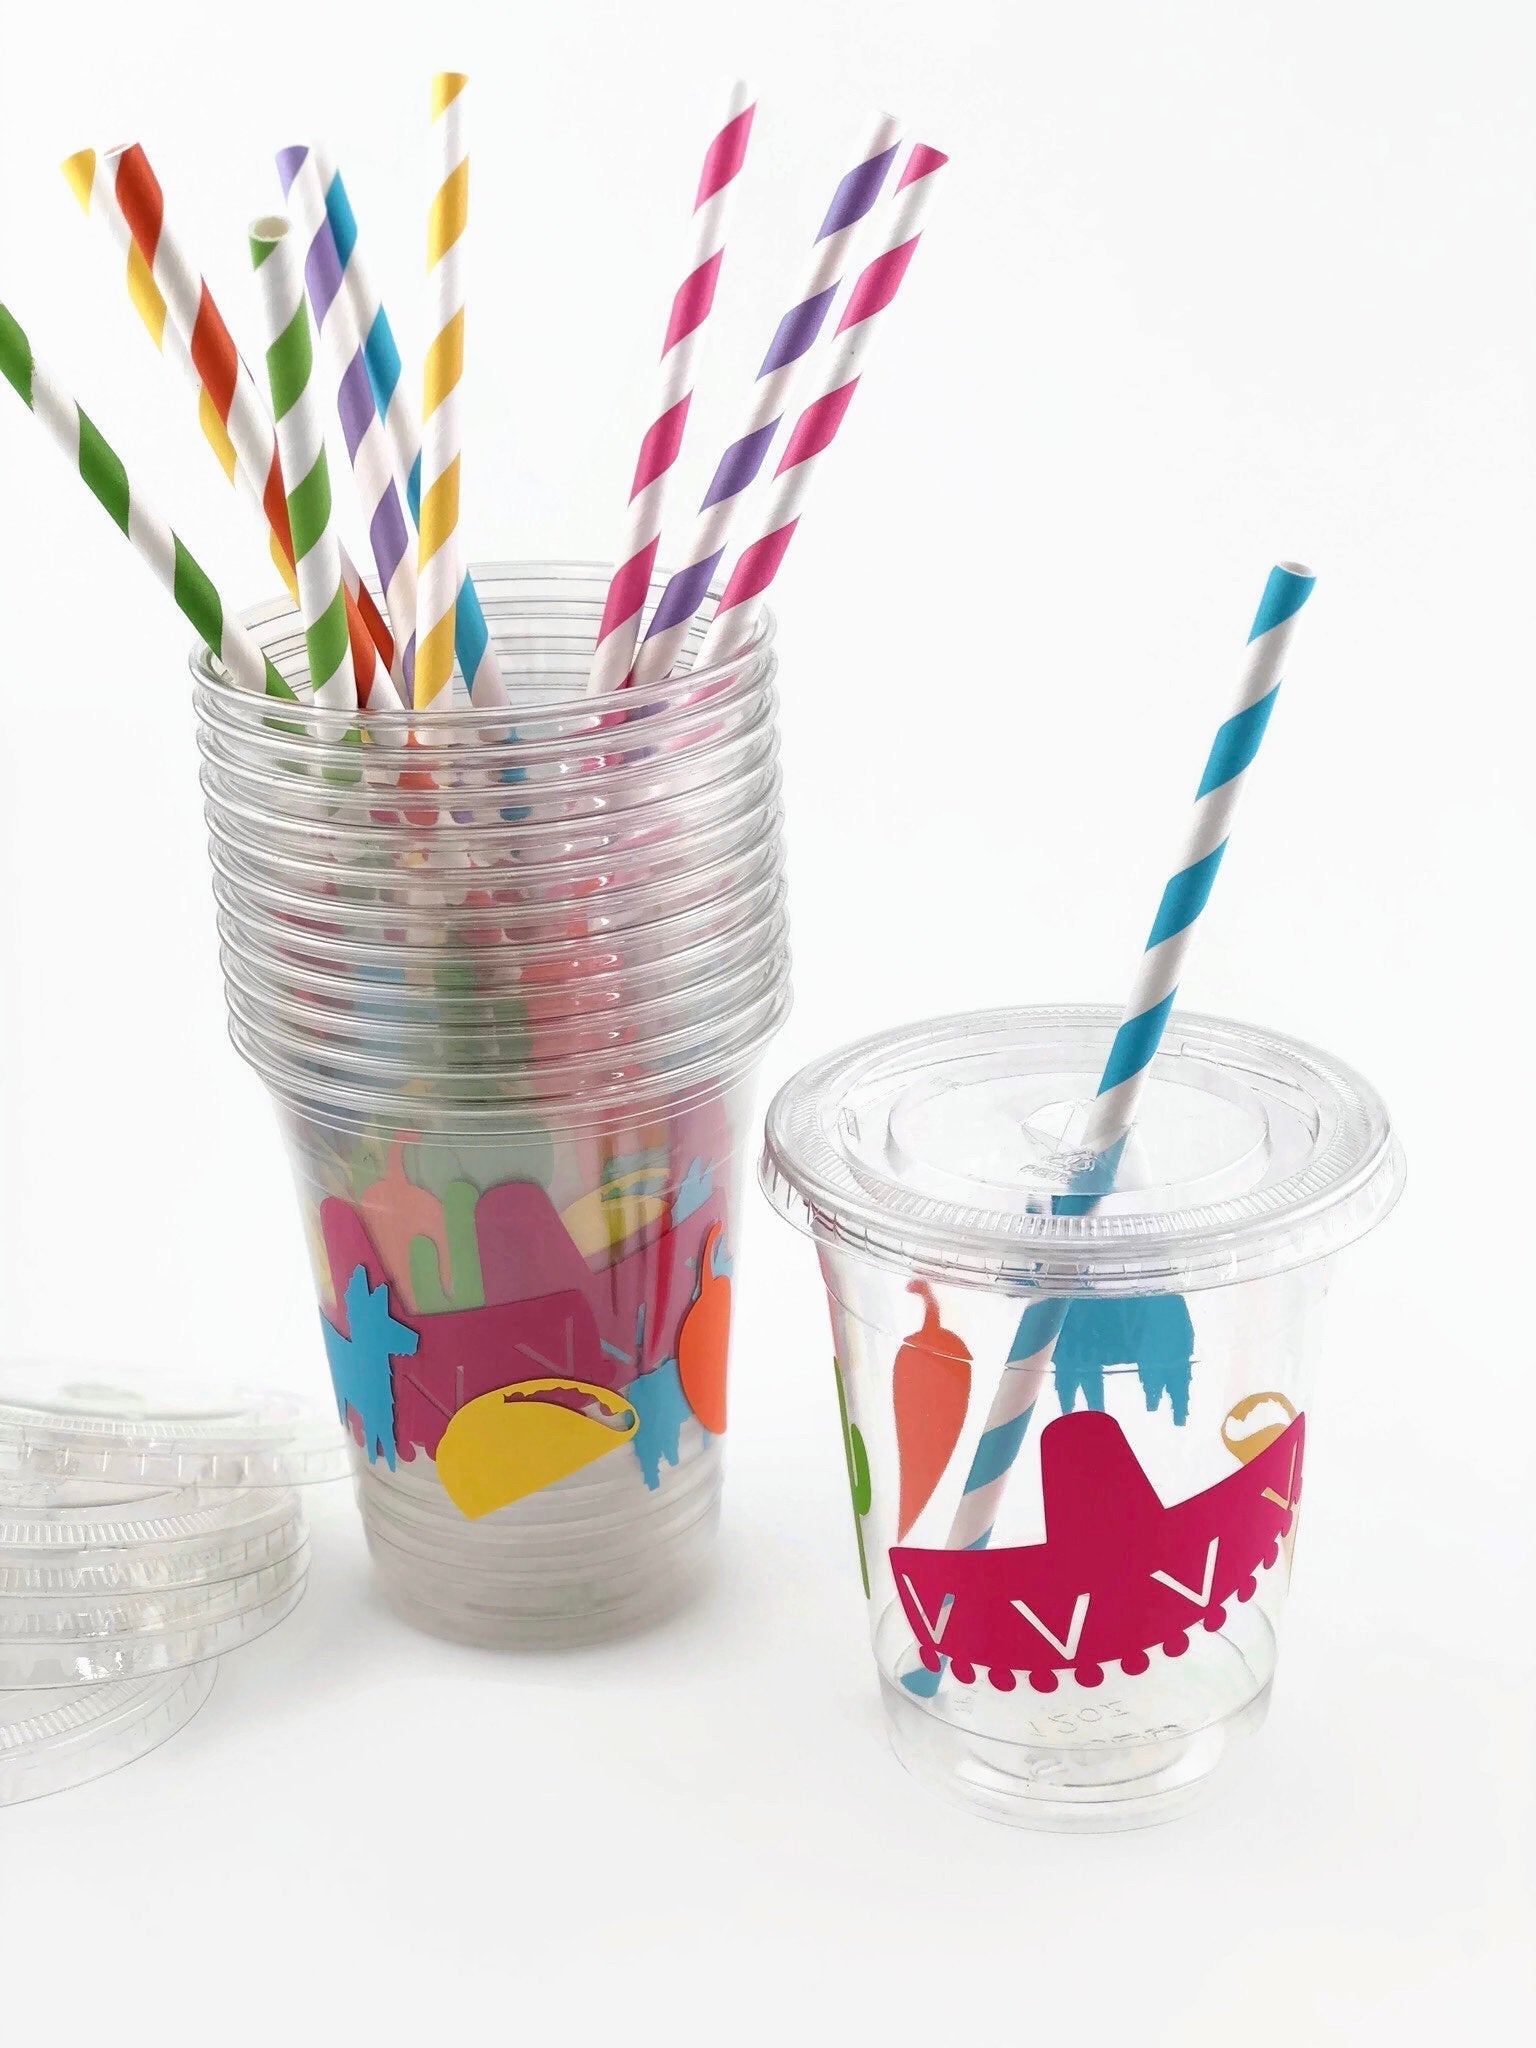 Fiesta Colorful Party Cup Set - Stesha Party - birthday, birthday